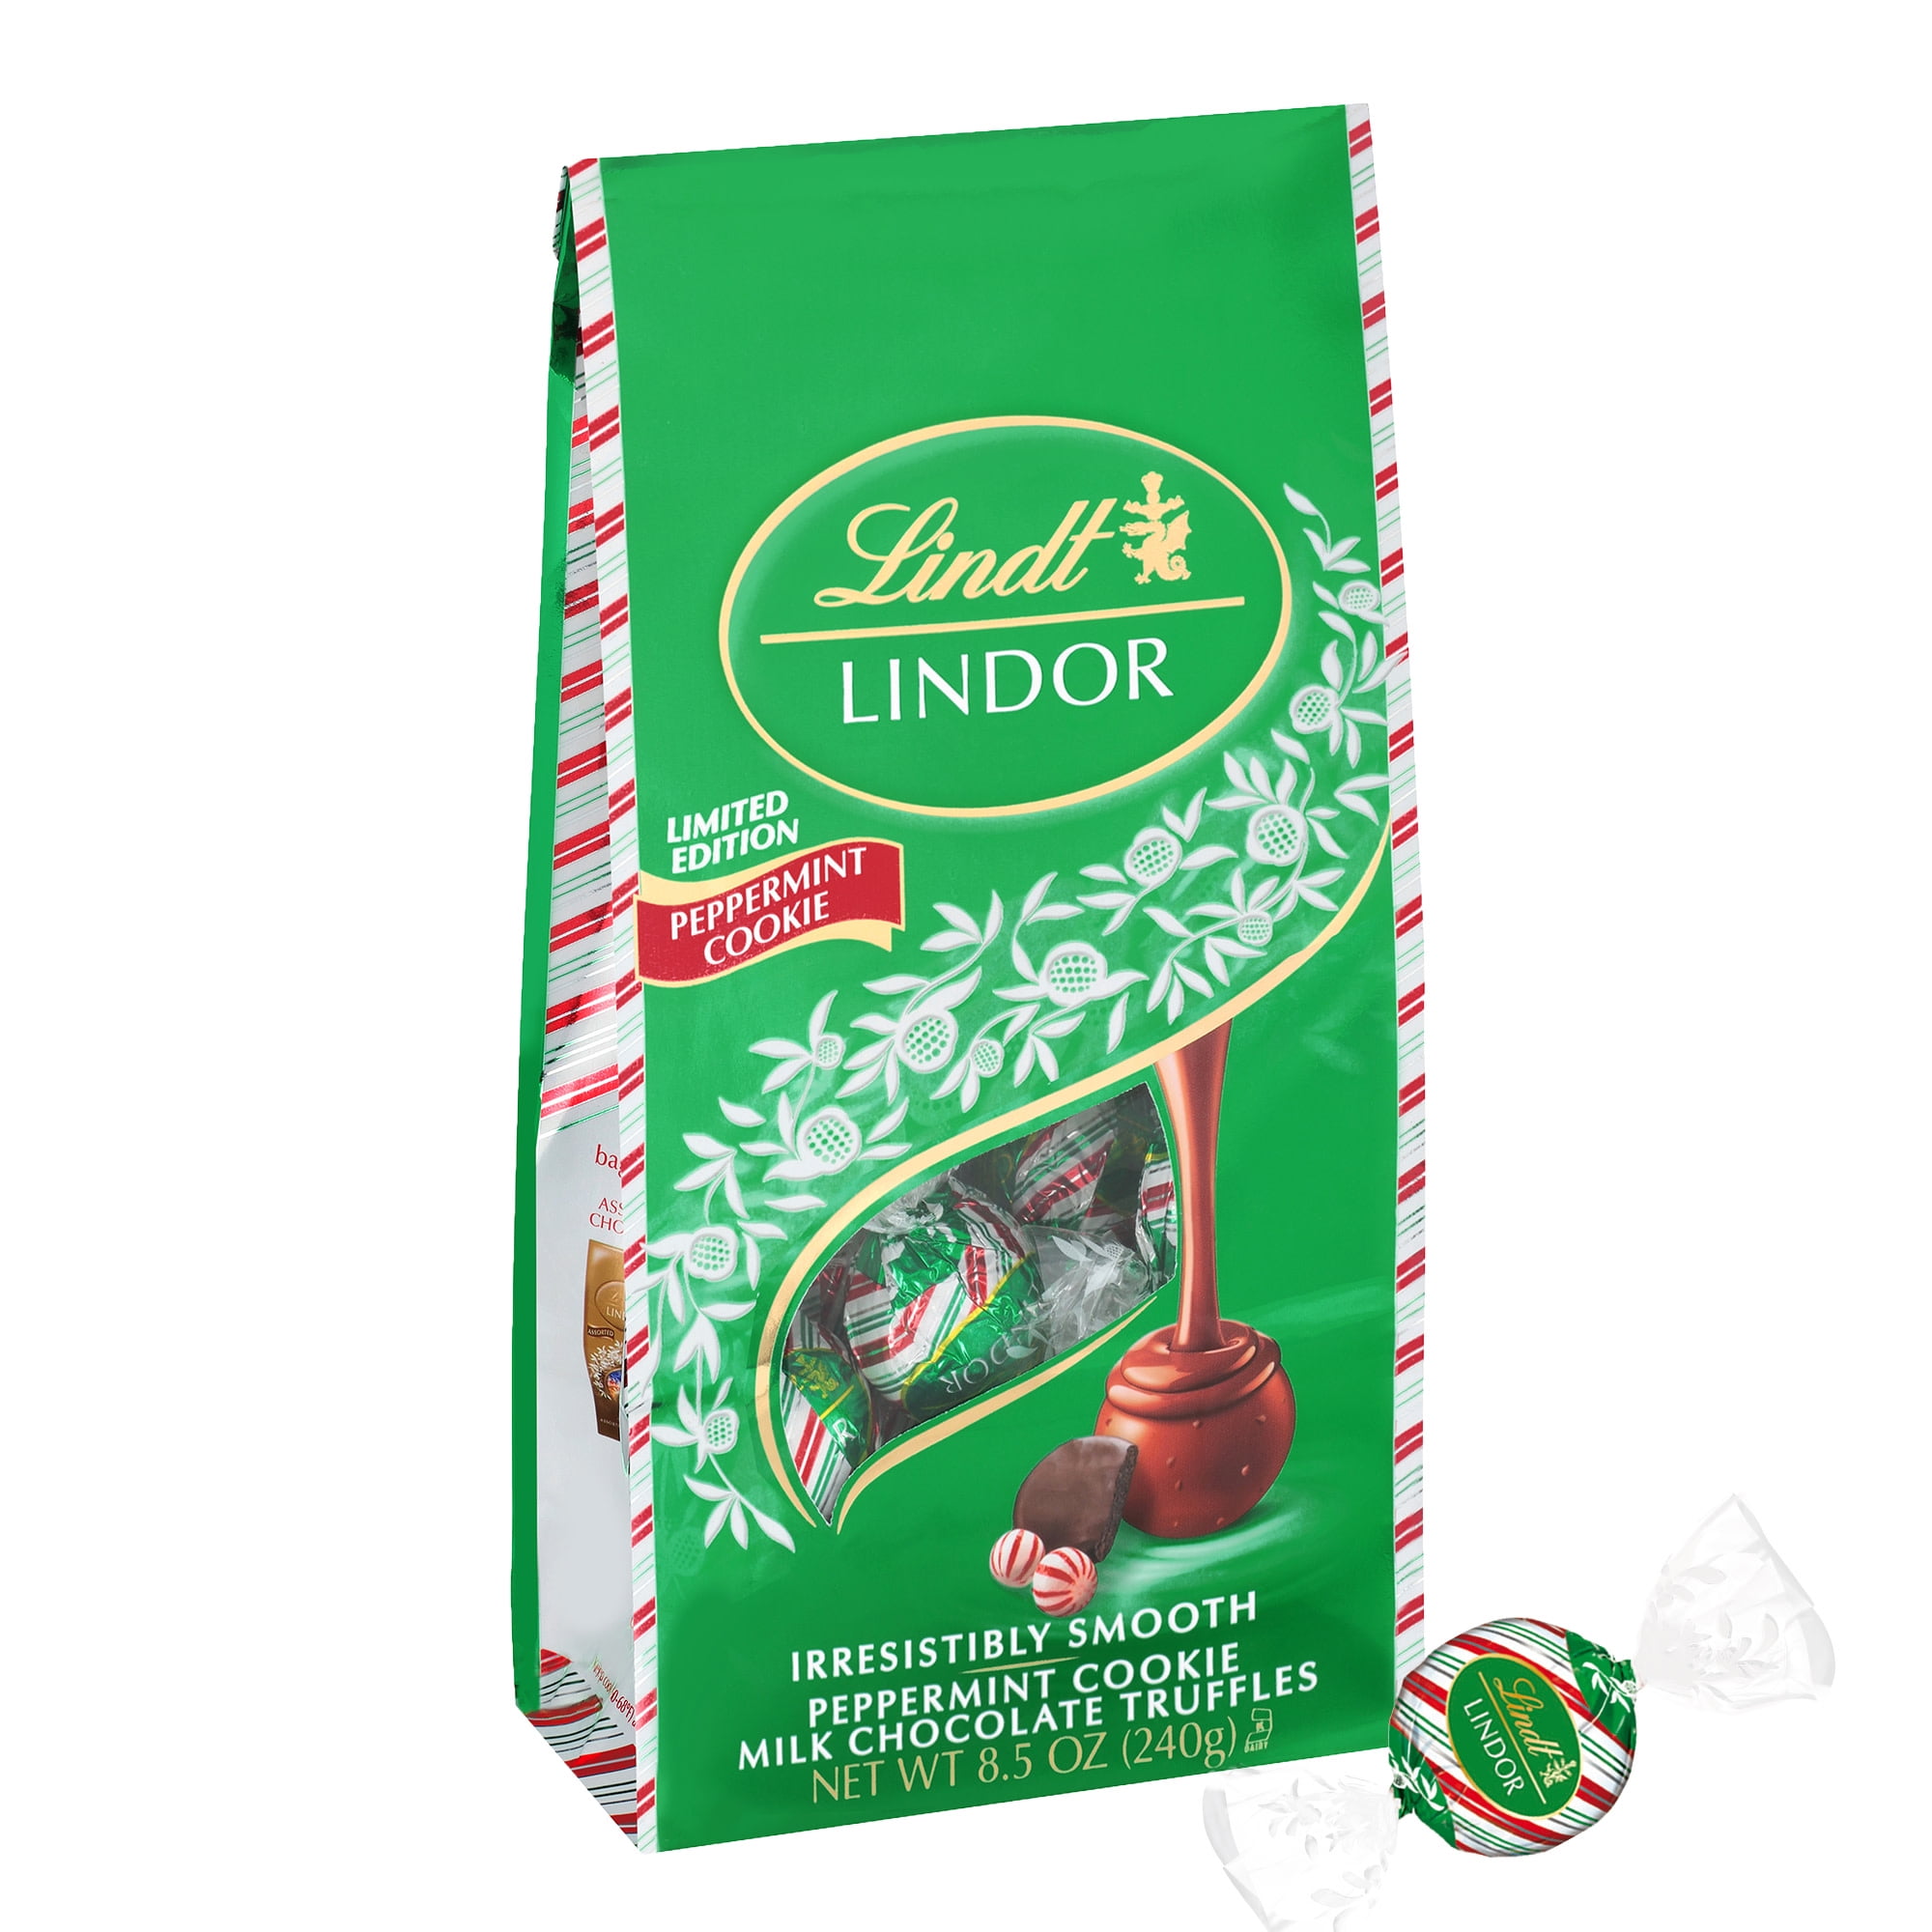 Lindt LINDOR Holiday Limited Edition Peppermint Cookie Milk Chocolate Candy Truffles, 8.5 oz. Bag